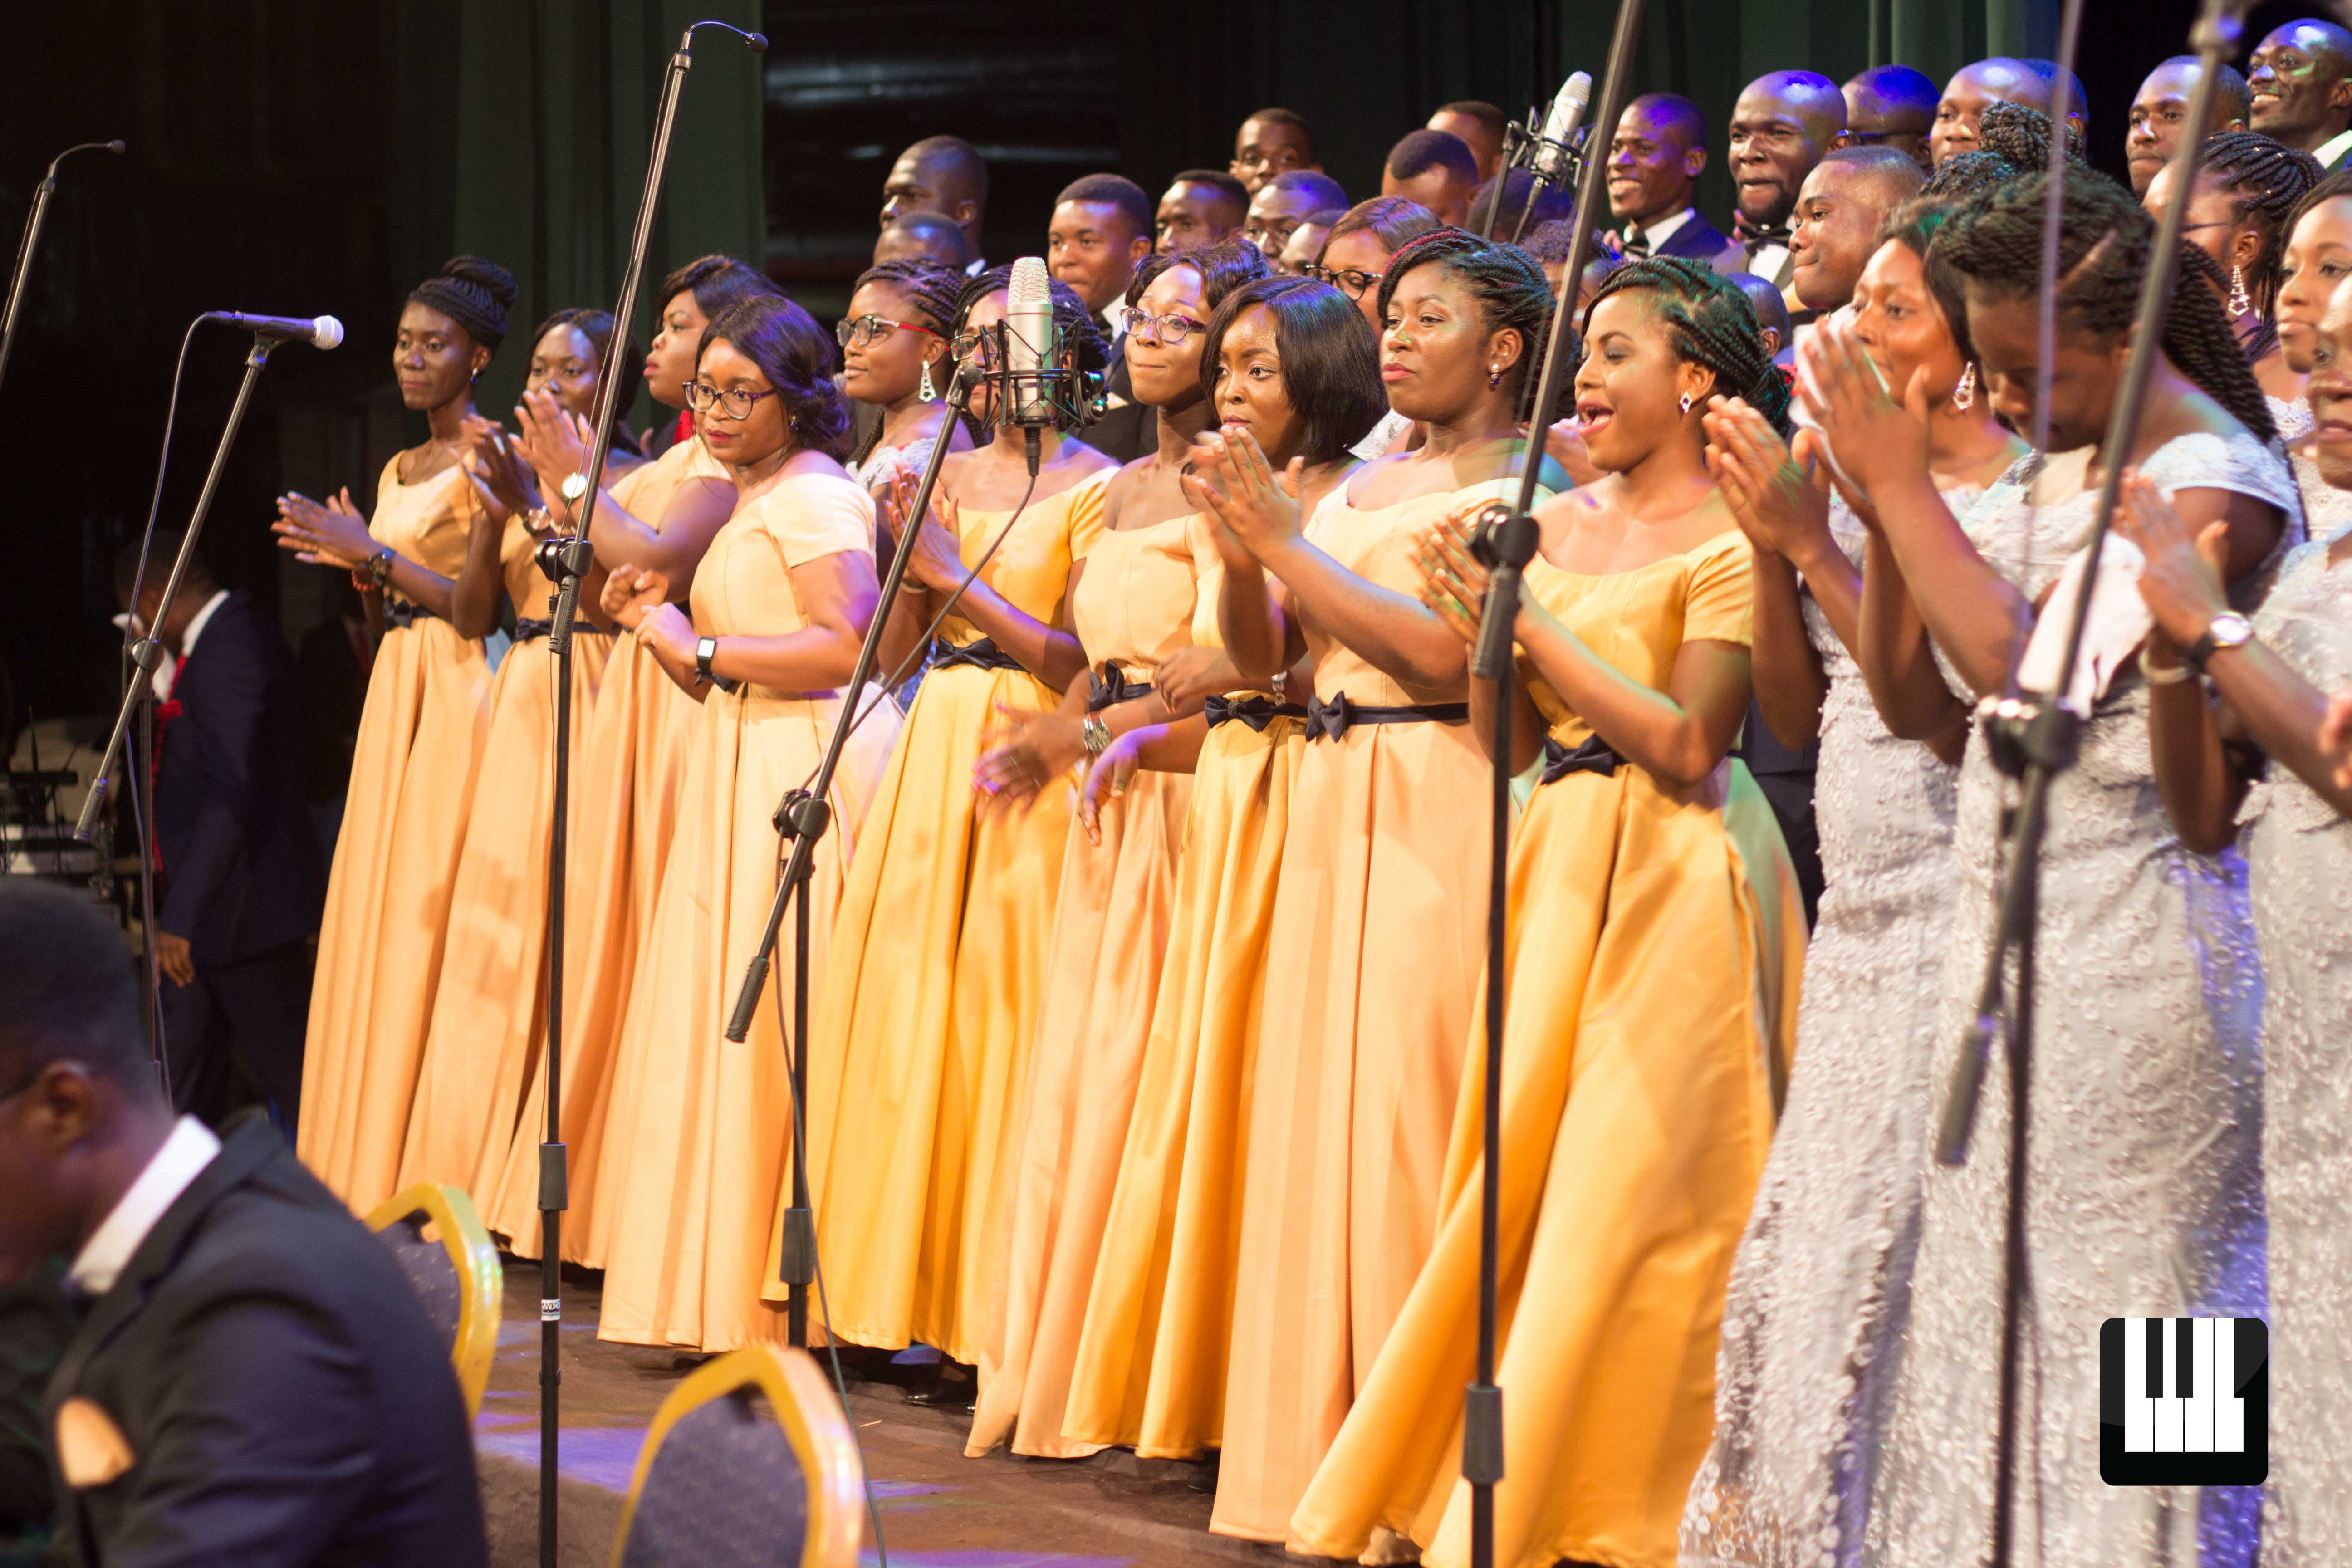 2018 Year in Review 2018 was a year of major milestones in Ghanaian choral and classical music. Jesse Johnson rounds up the best moments of the last twelve months.